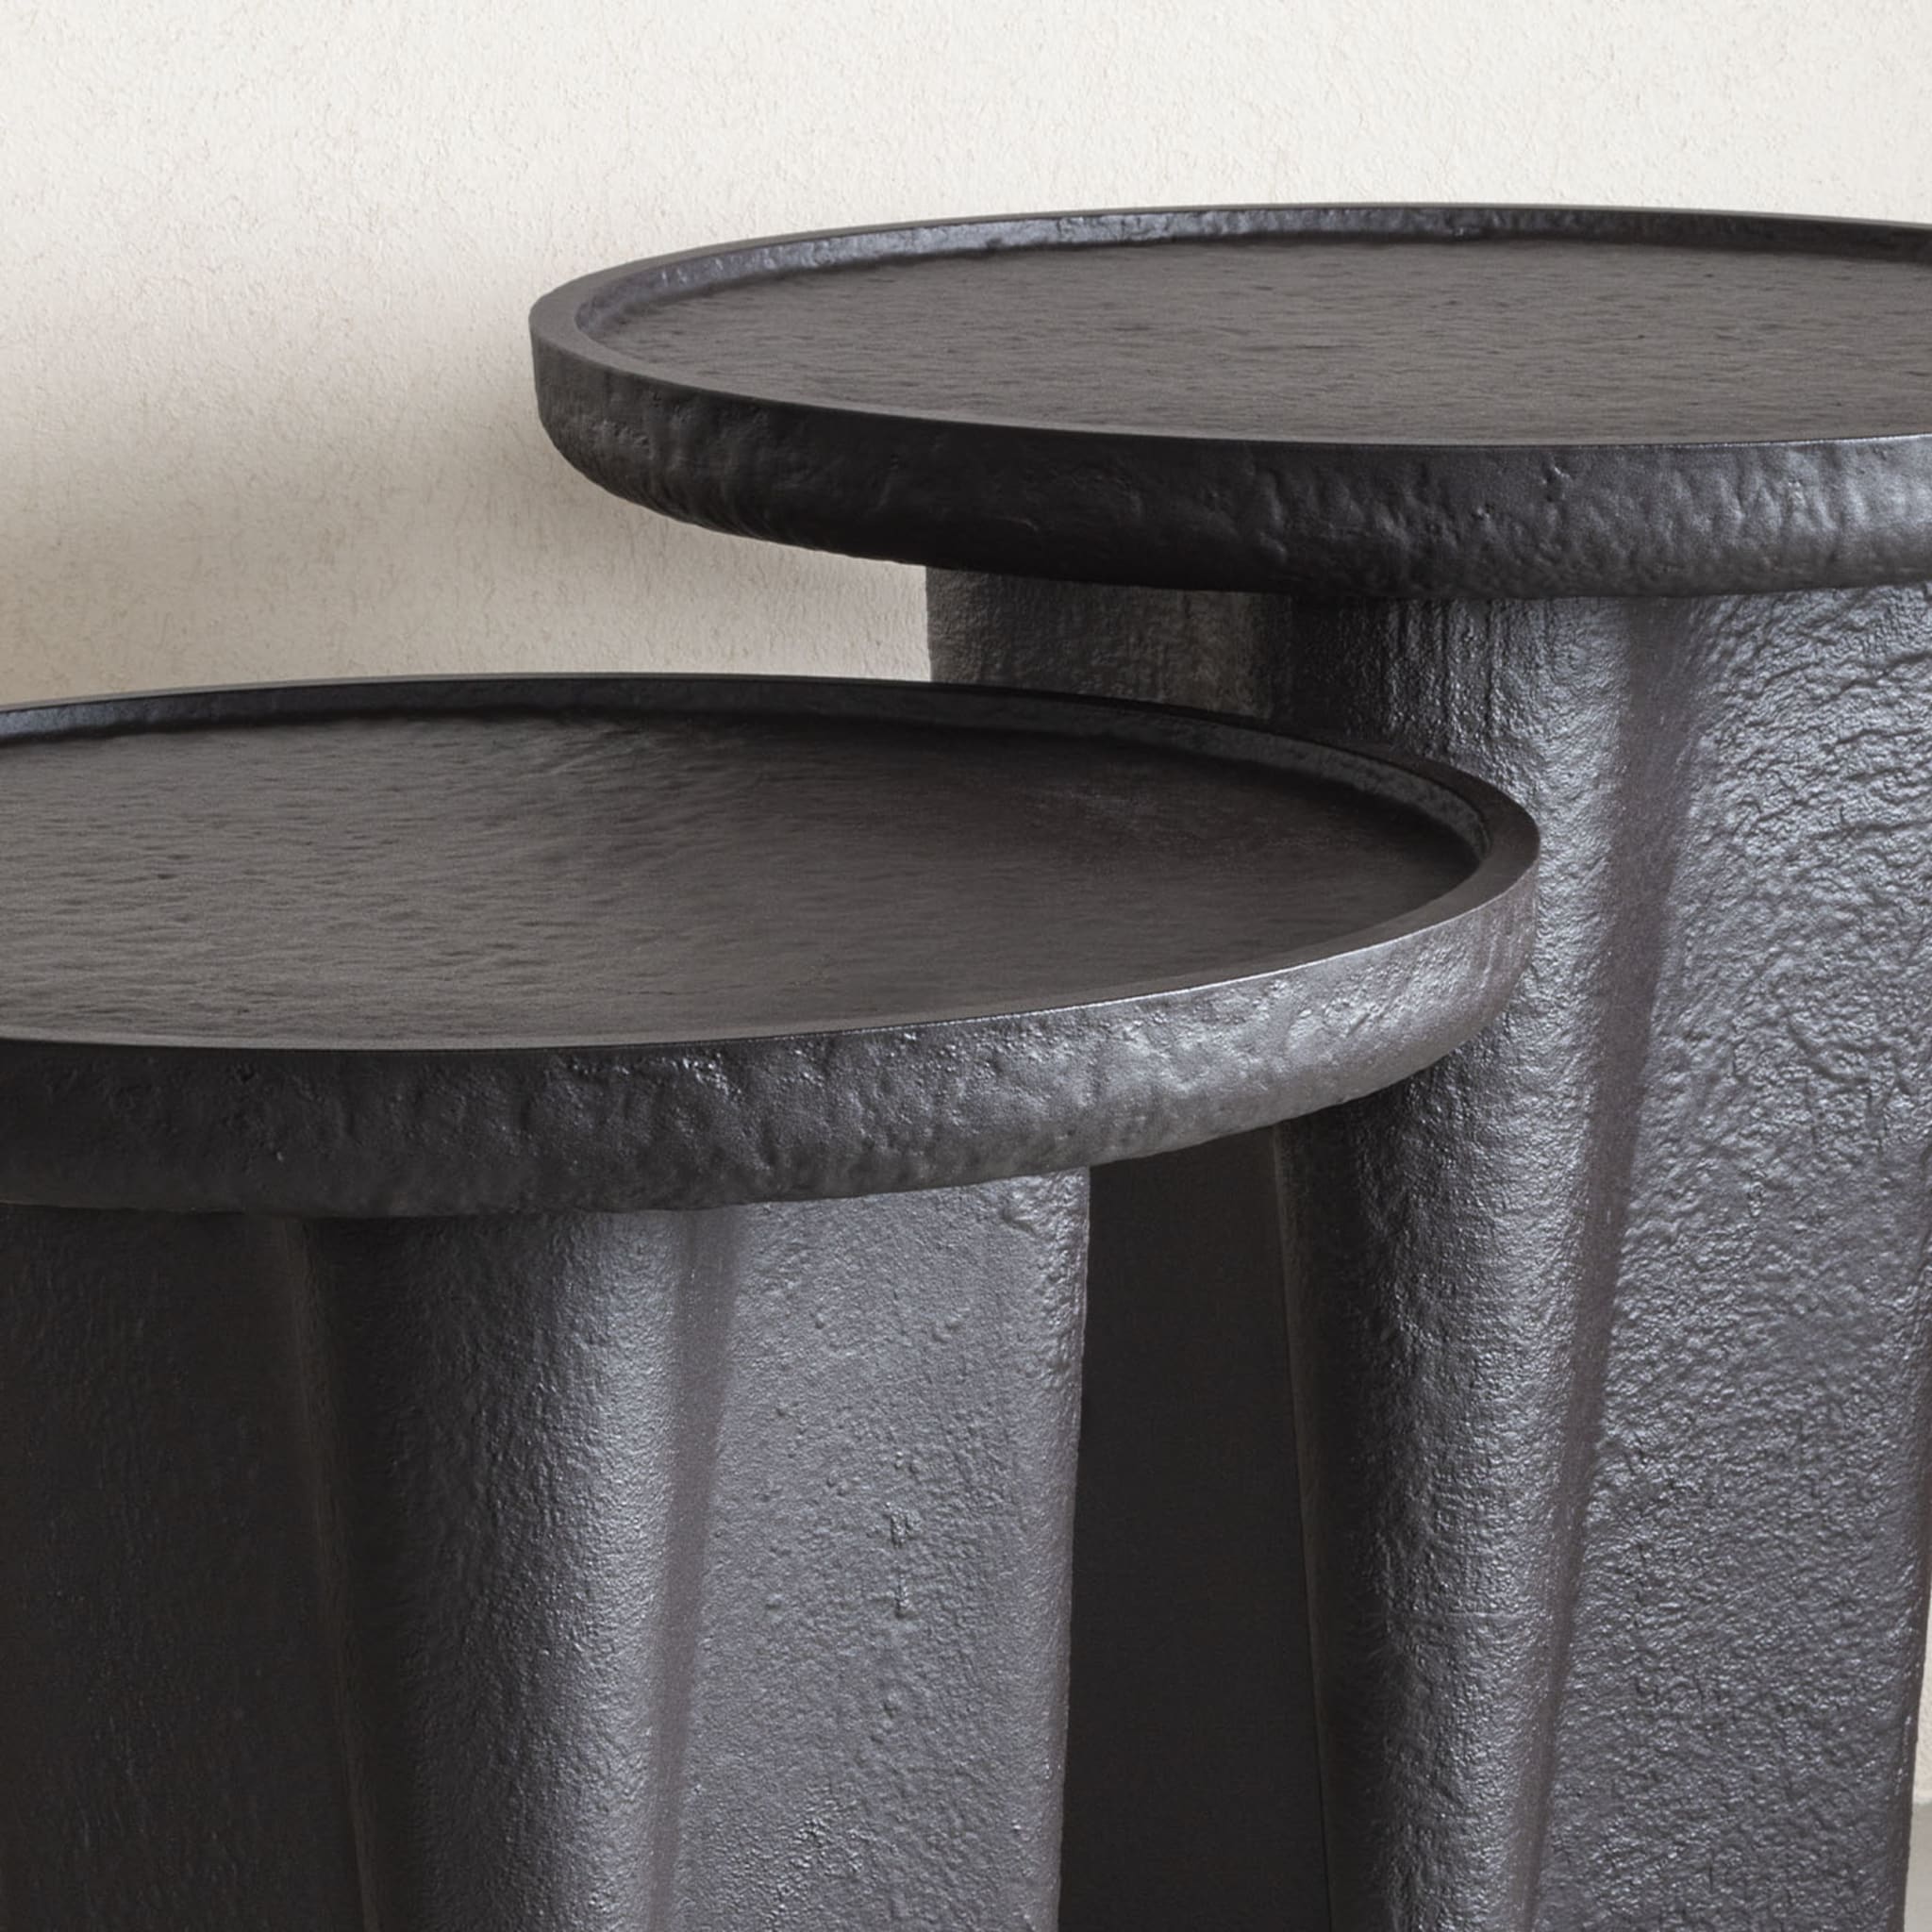 Tanell Imperfect Low Bronze Side Table - Alternative view 3